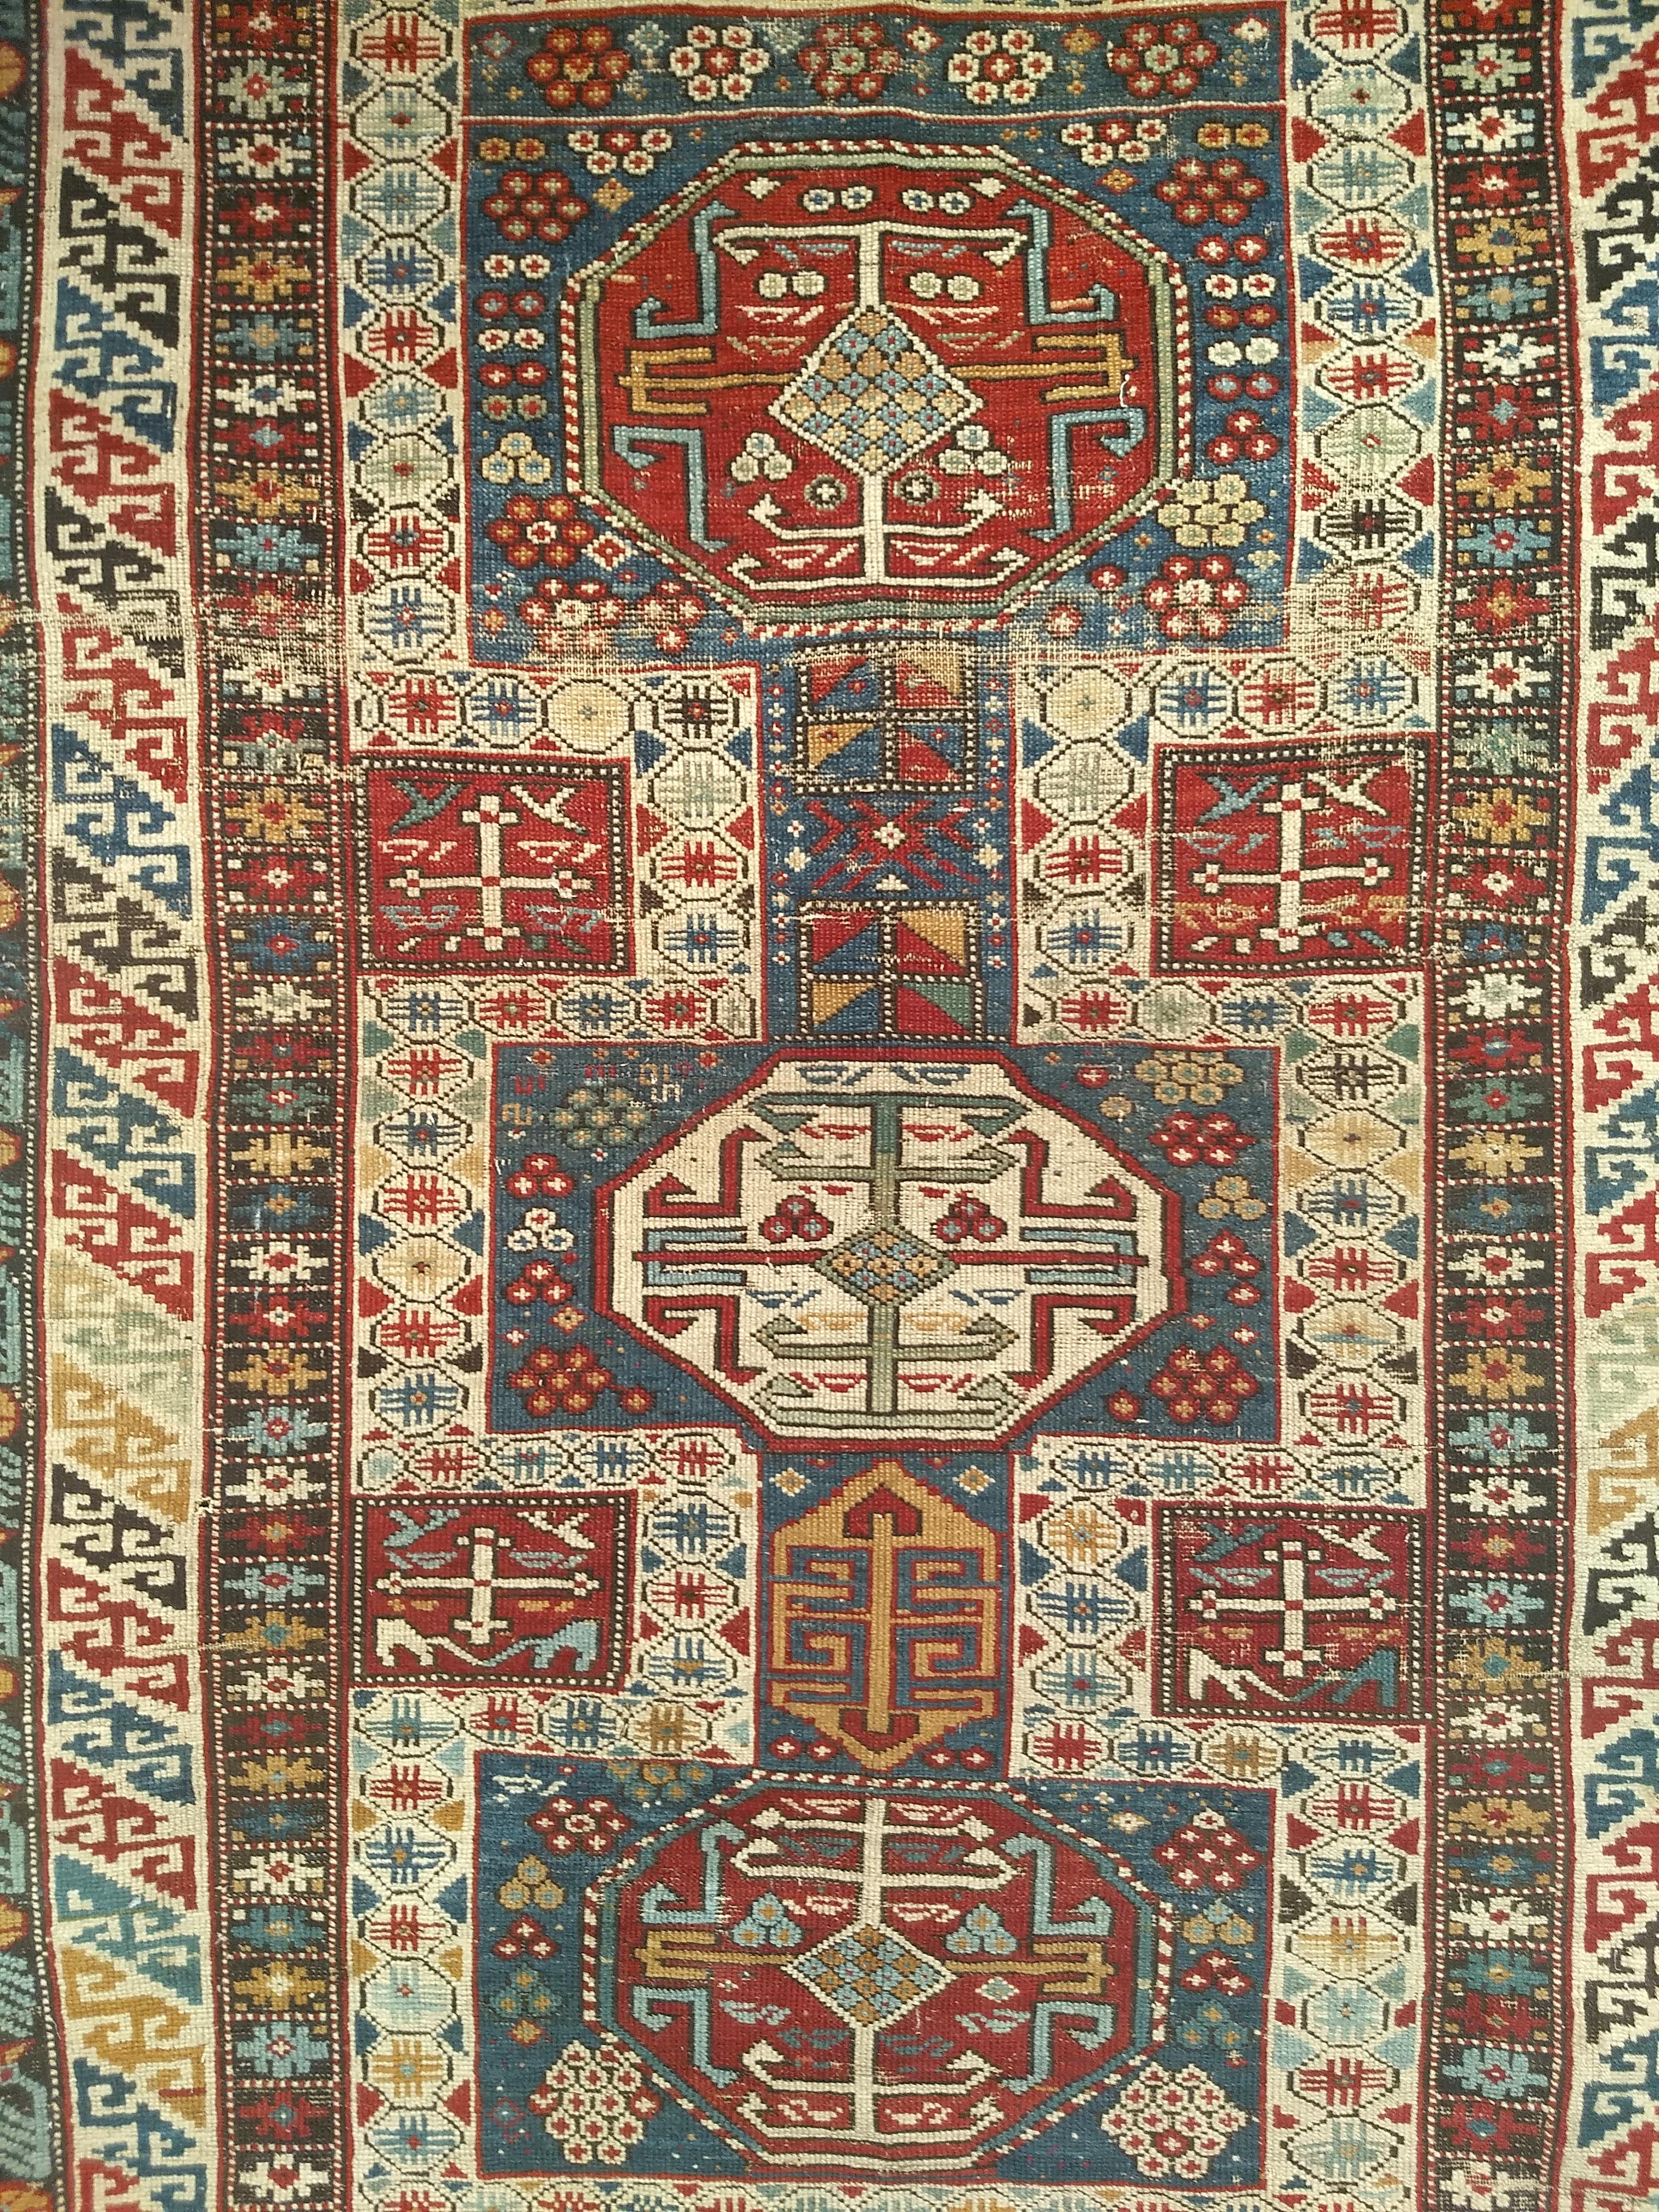  Early 1900s Caucasian Kuba Area Rug in French Blue, Red, Ivory, Yellow In Good Condition For Sale In Barrington, IL